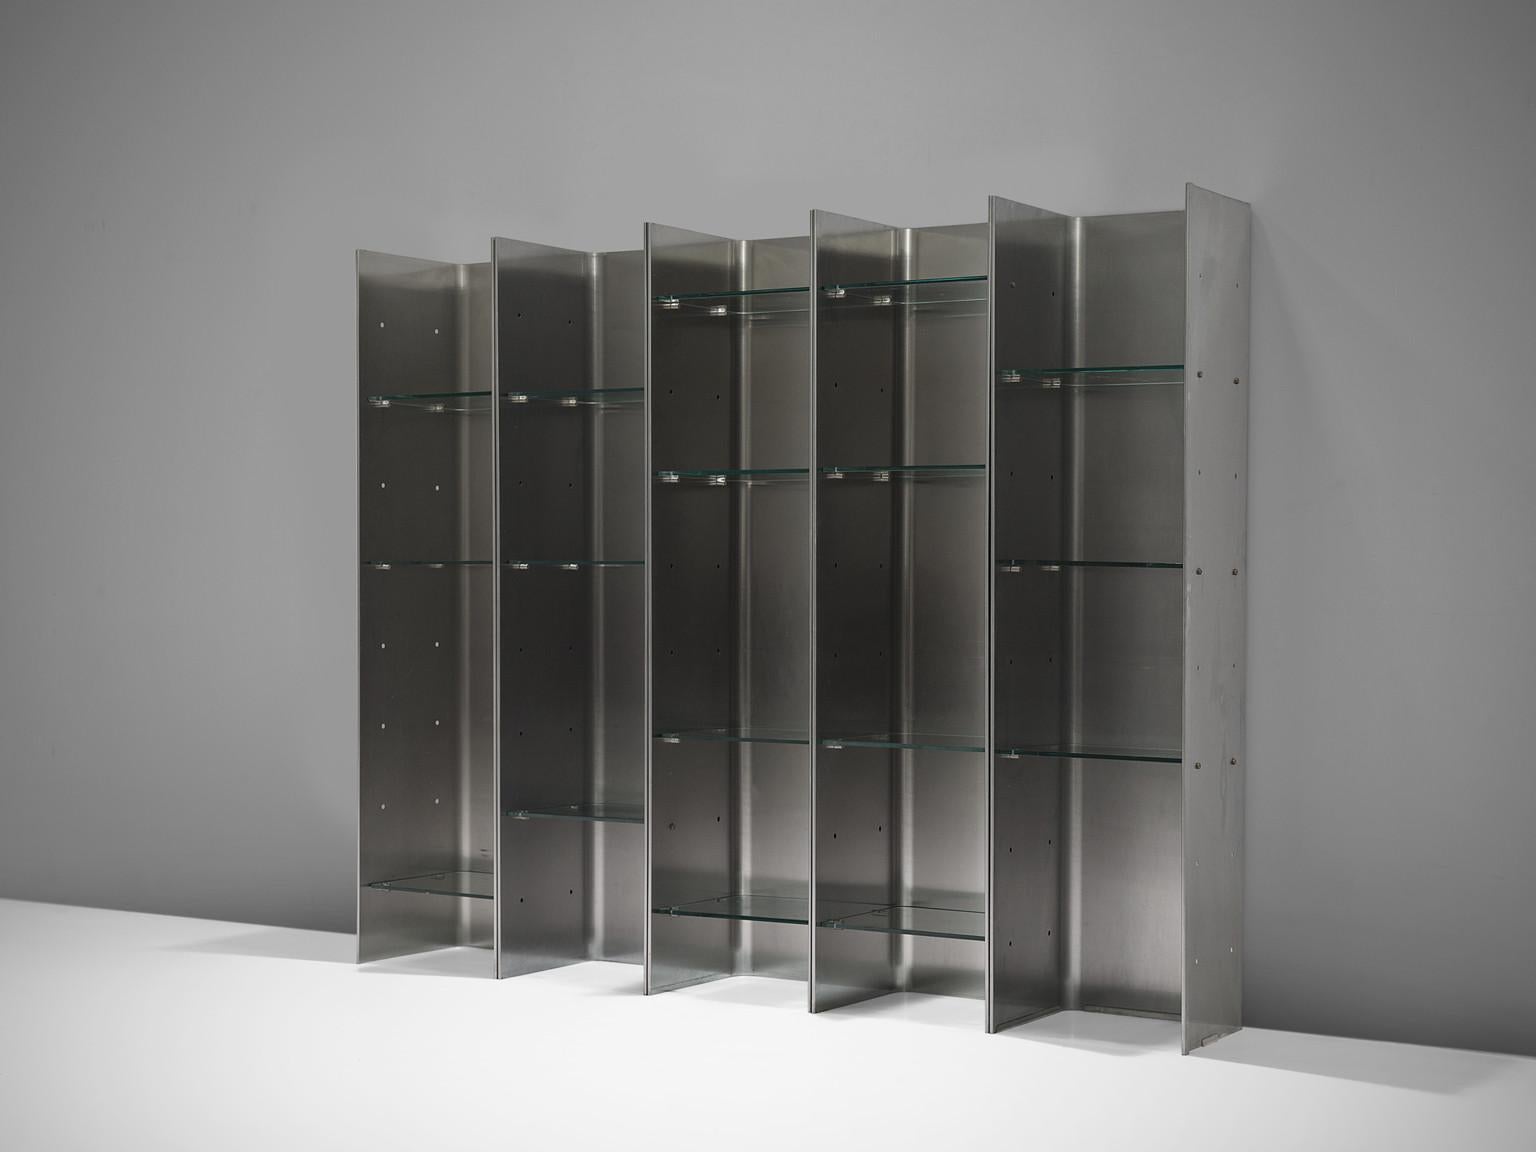 Bookcase by Carla Venosta & Guido Zimmerman for Arflex, metal, Plexiglas, Italy, 1970s

This steel bookcase with Plexiglas shelves has a clean and geometric design which is emphasized by the rawness of the materials. This particular unit consists of